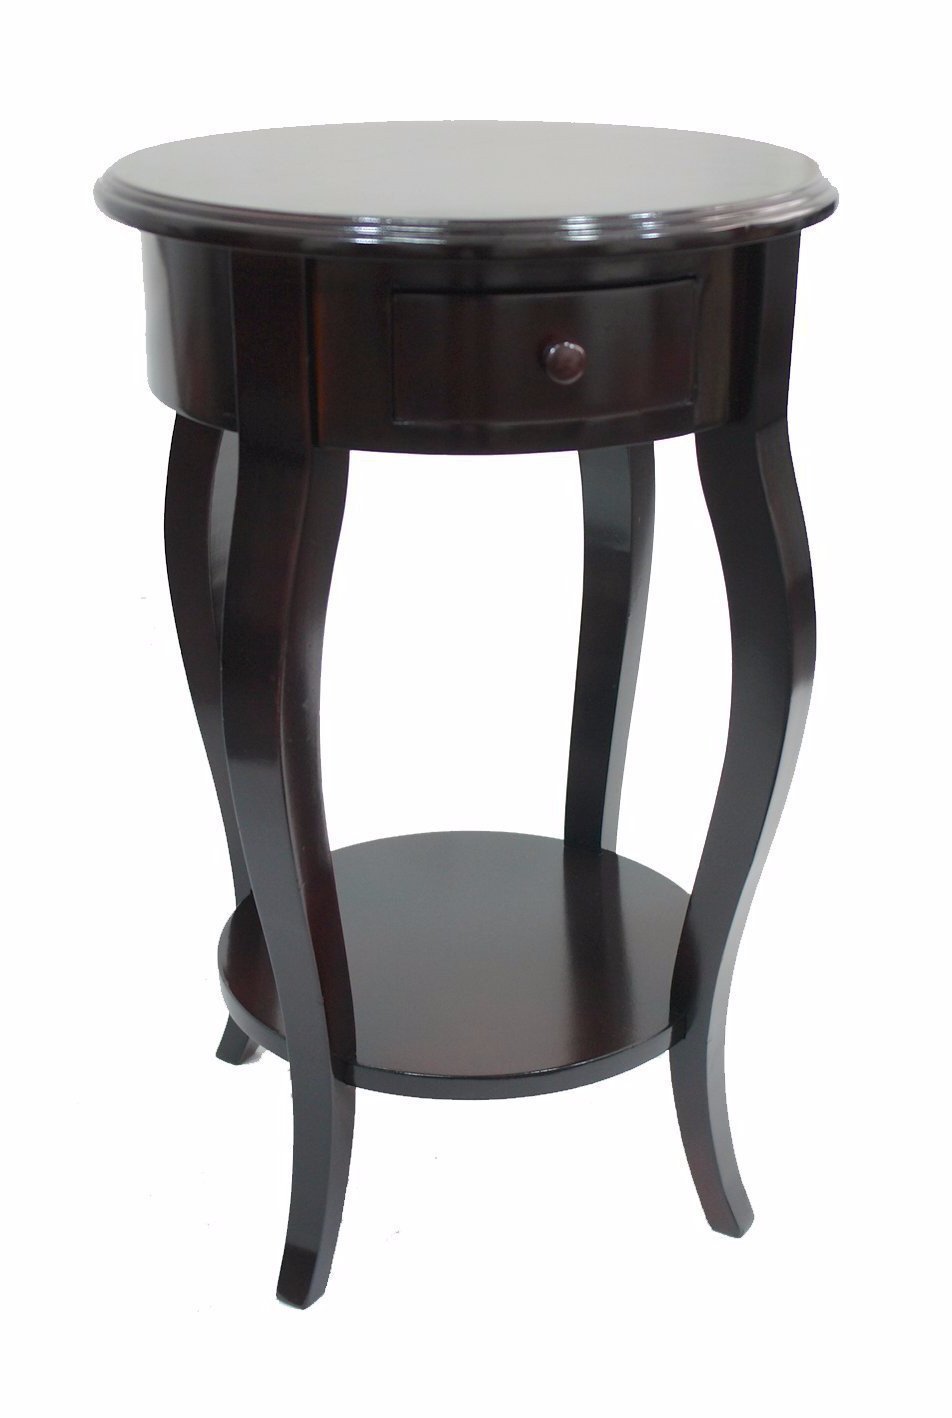 round accent side table dark brown urbanest keffl small patio and chairs tall skinny nightstand target dining short furniture legs modern style lamps extendable glass room top